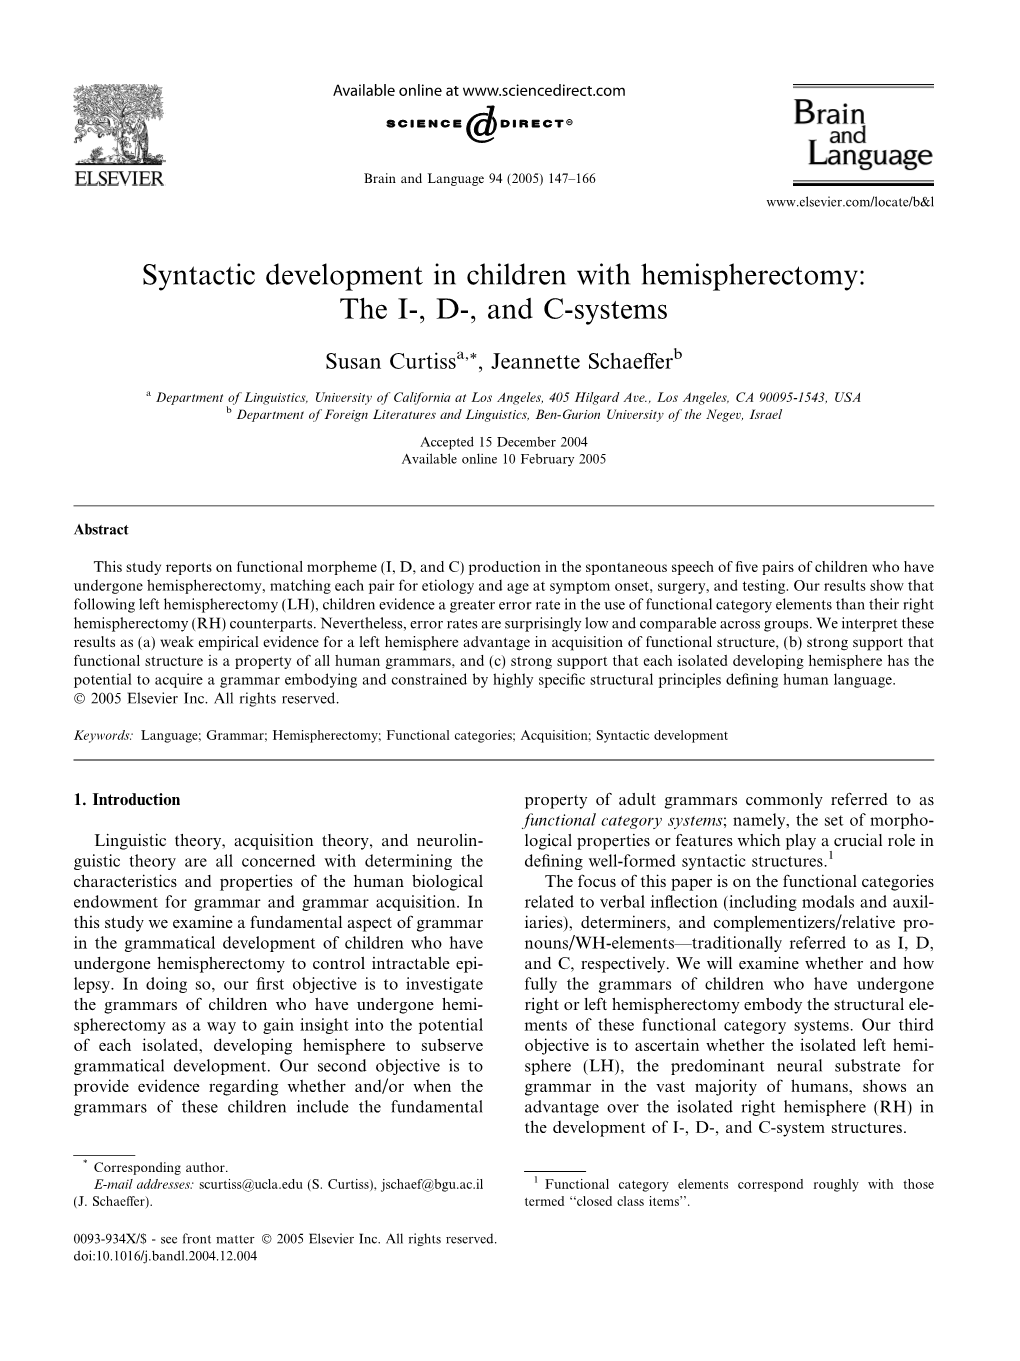 Syntactic Development in Children with Hemispherectomy: the I-, D-, and C-Systems